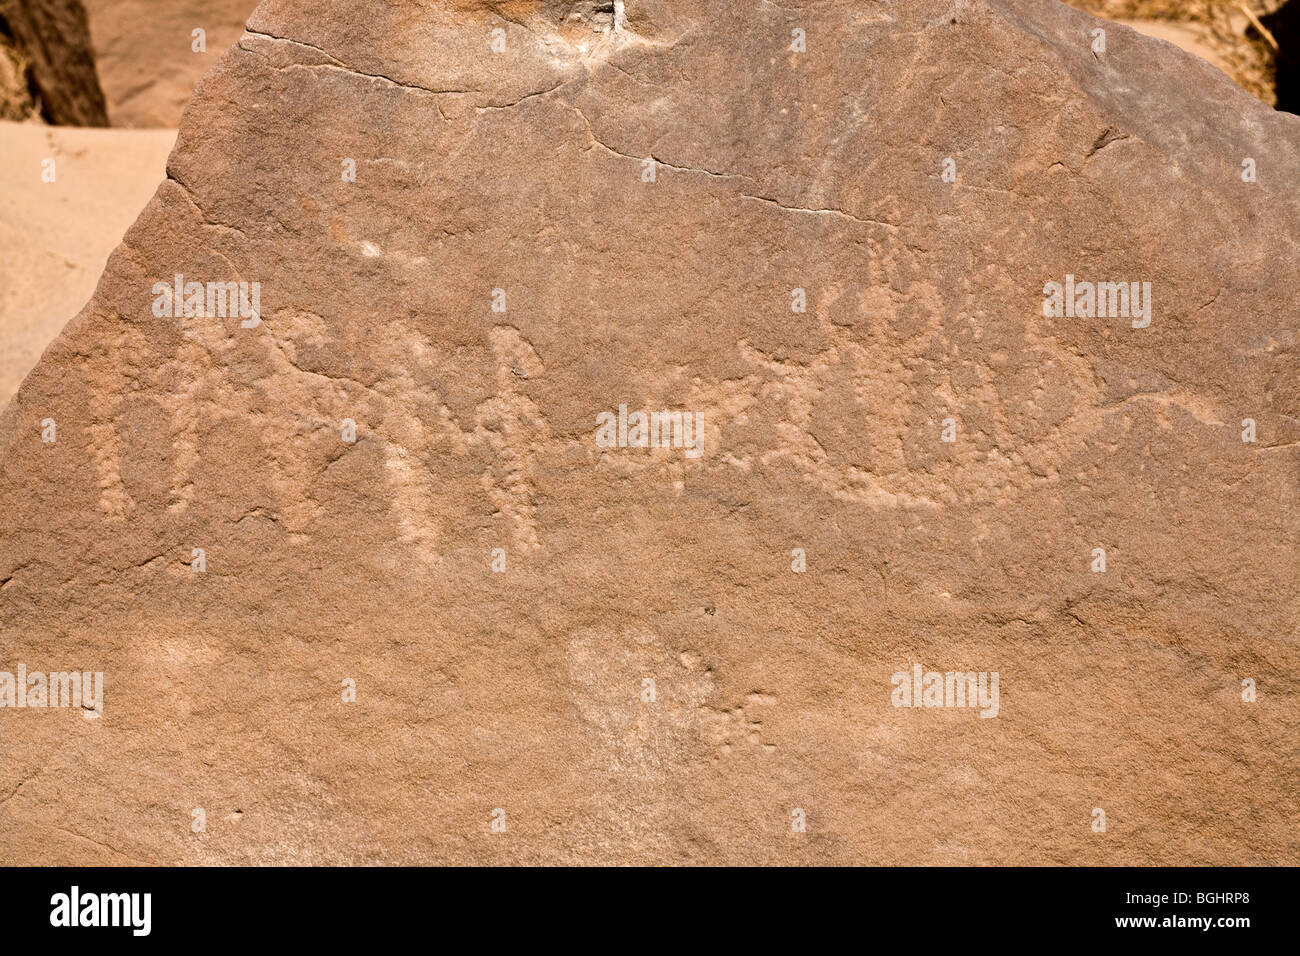 Close up of image of boat towing on rock at Winklers famous Rock-Art site 26 in Wadi Abu Wasil in the Eastern Desert of Egypt. Stock Photo